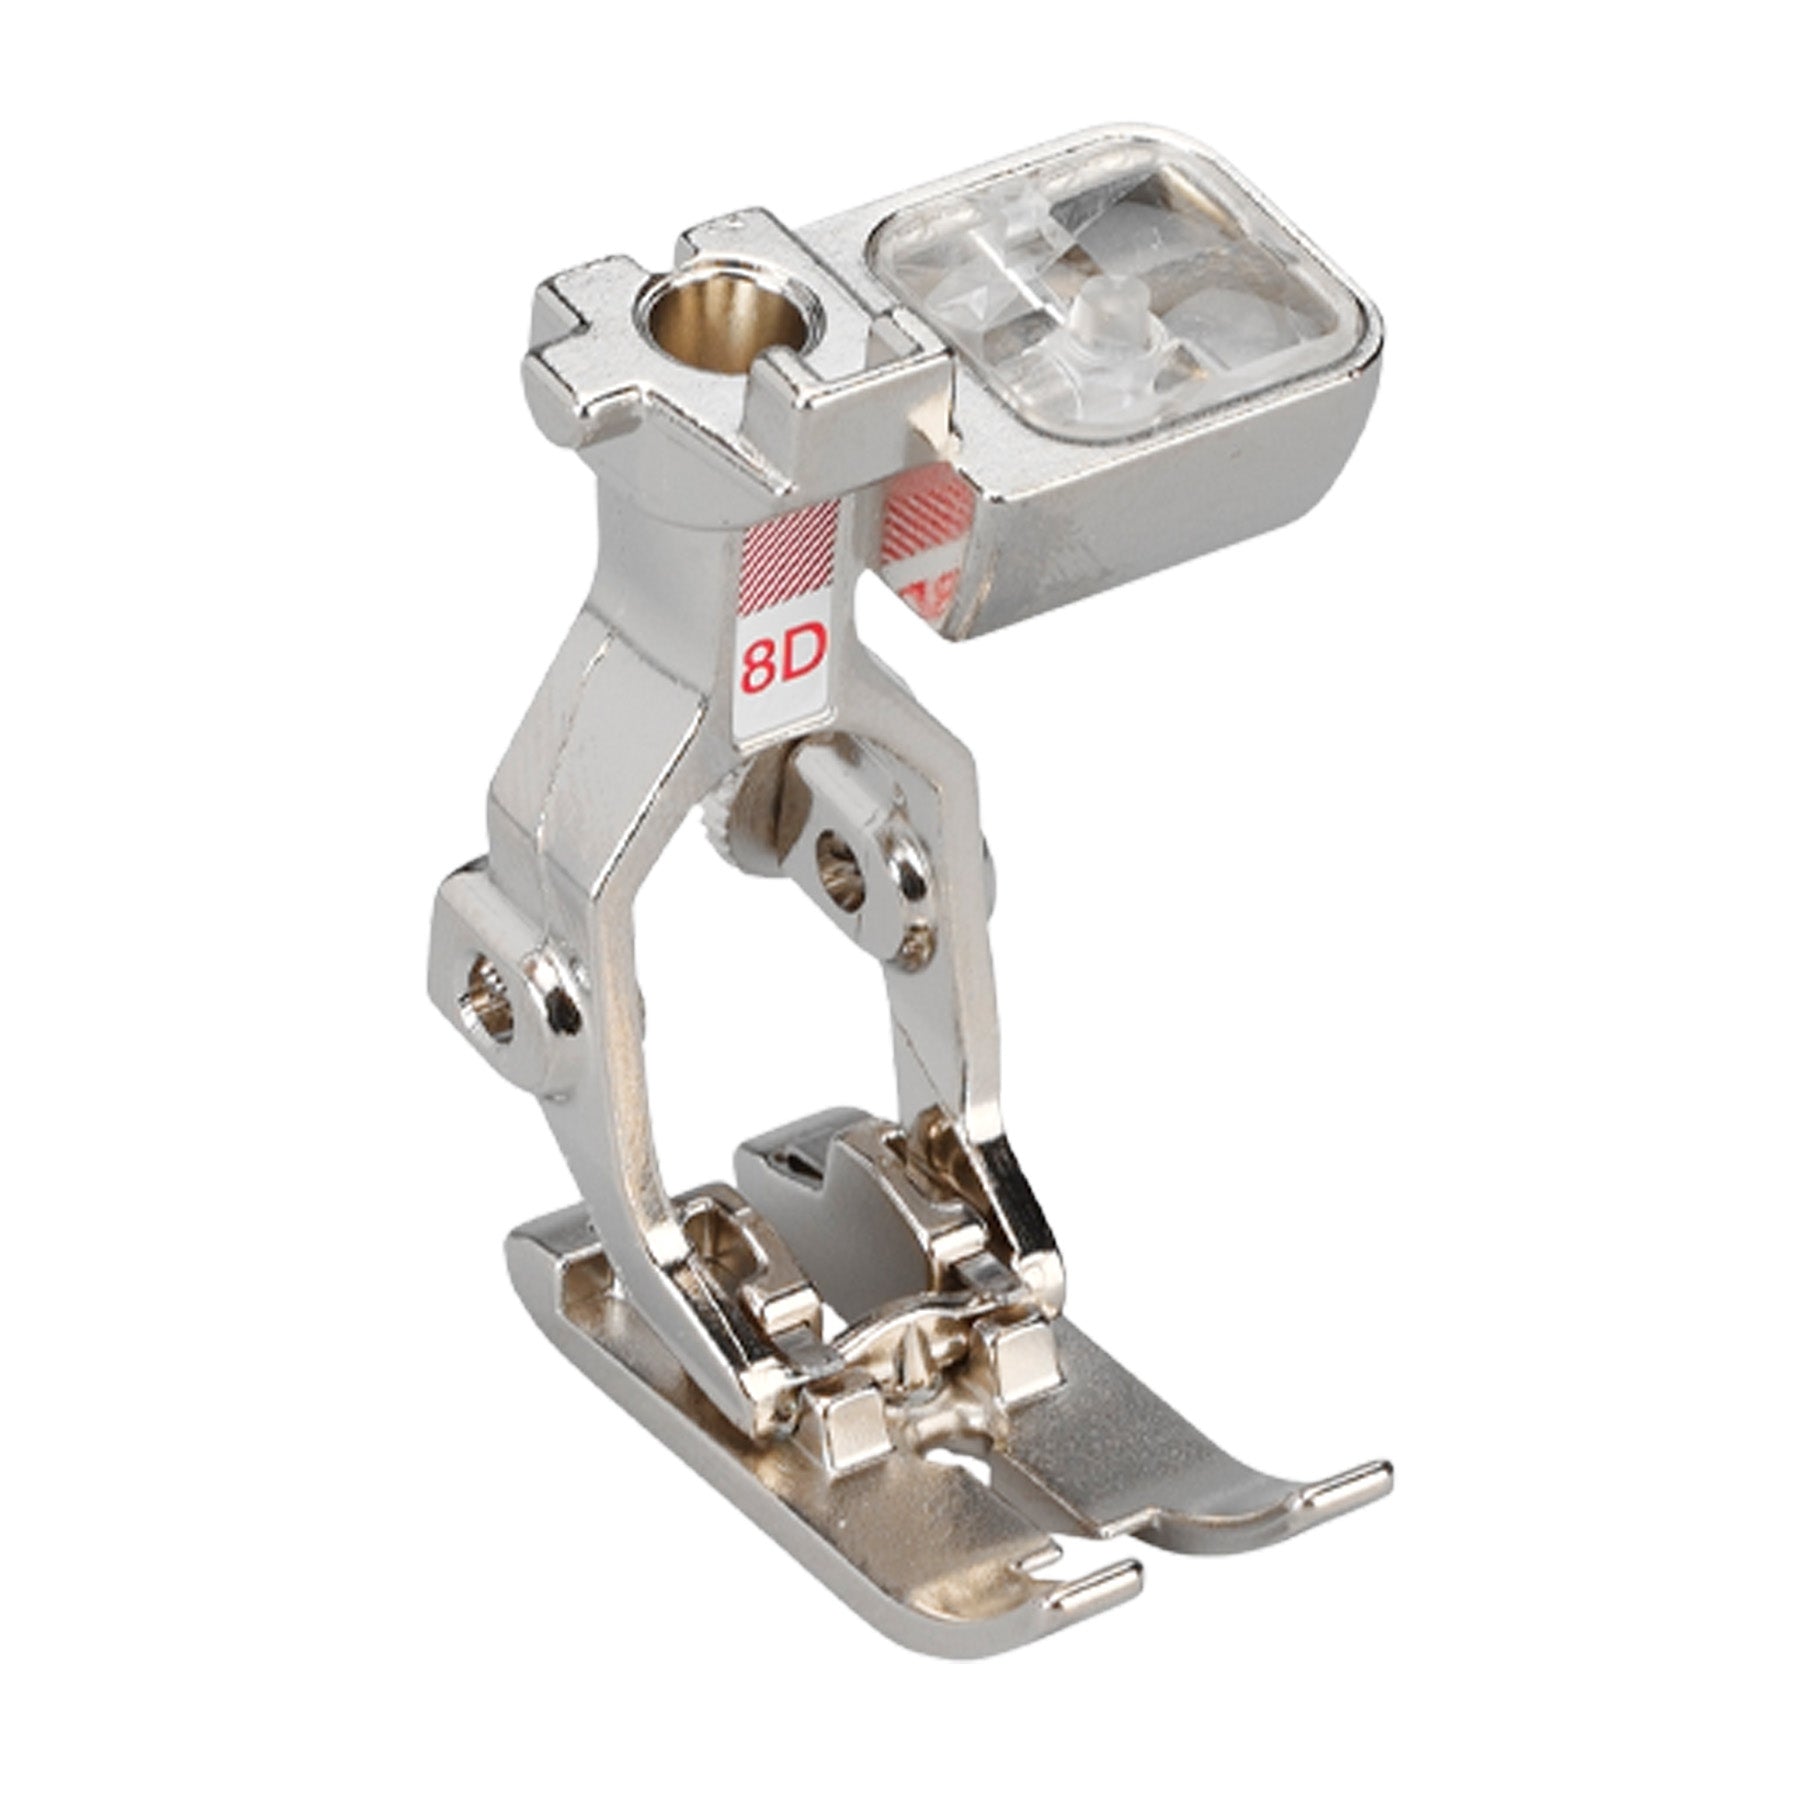 Bernina Jeans Foot with Dual Feed #8D